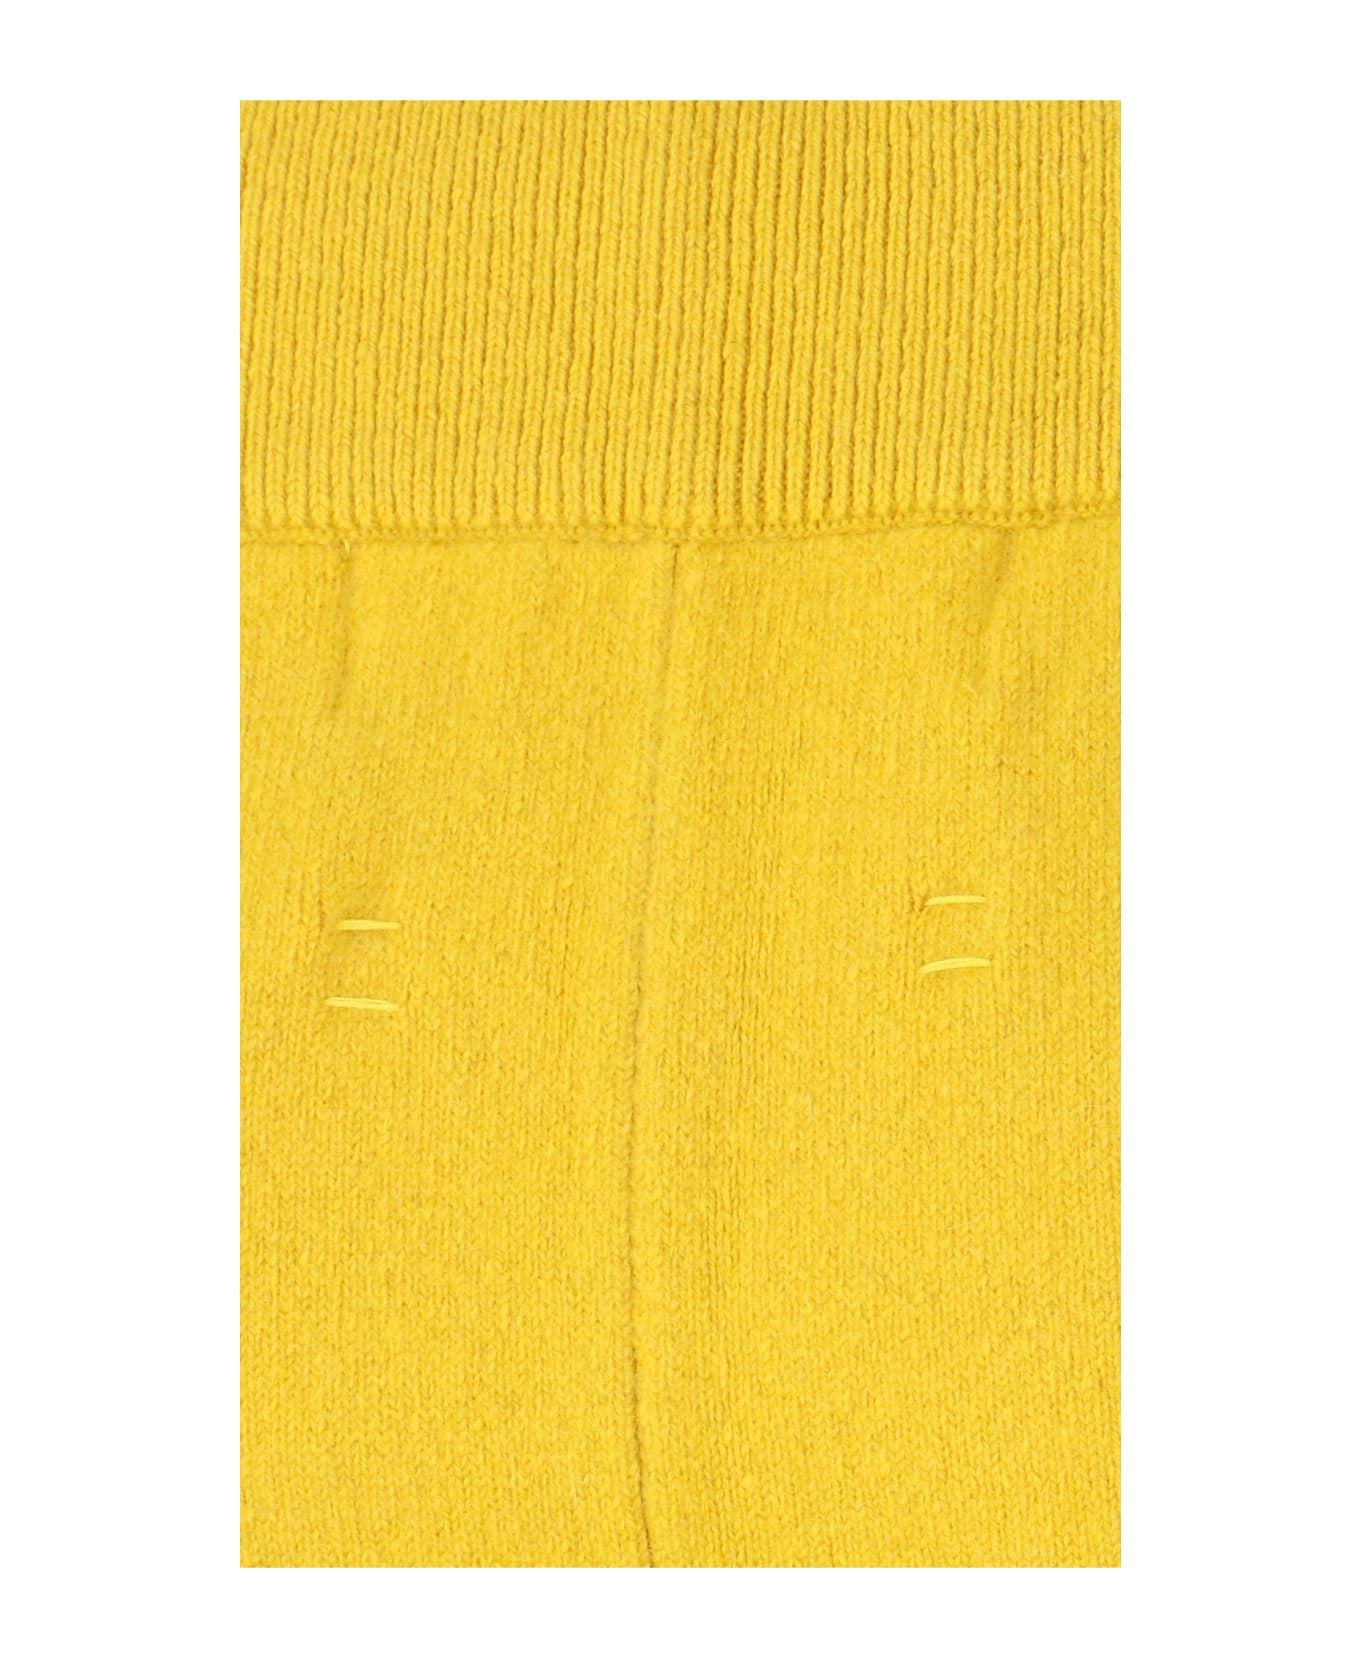 Extreme Cashmere Pants - Yellow